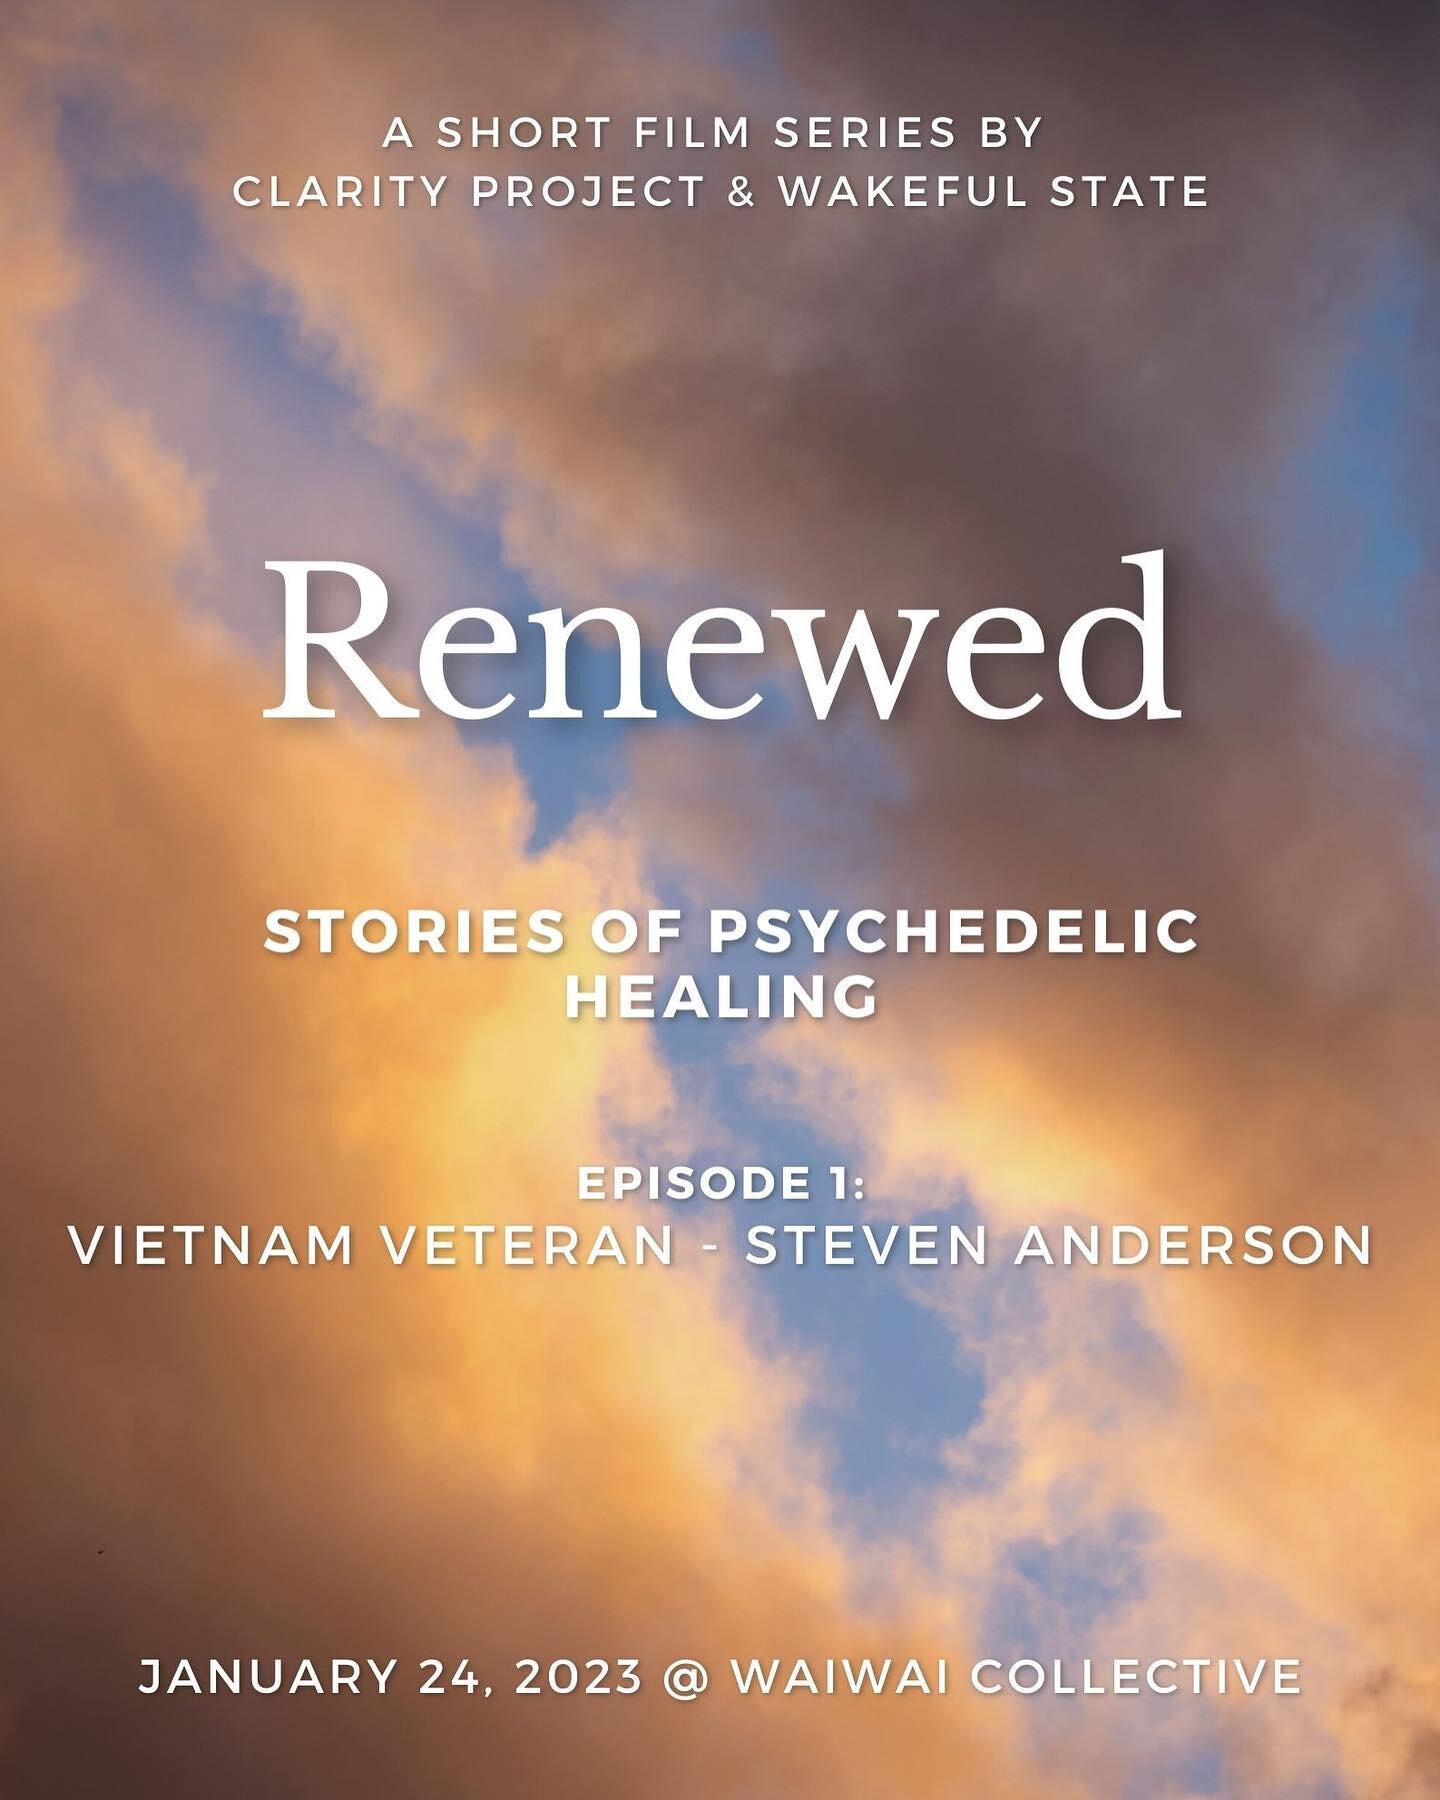 🌈 UPCOMING IN-PERSON EVENT 🌞 The Politics of Psychedelics ☼ and a screening of our short film 🍄 Renewed - Stories of Psychedelic Healing ❤️&zwj;🩹 w/Vietnam Veteran - Steven Anderson🎥

Join @clarityhawaii for a public event at 📍@waiwaicollective